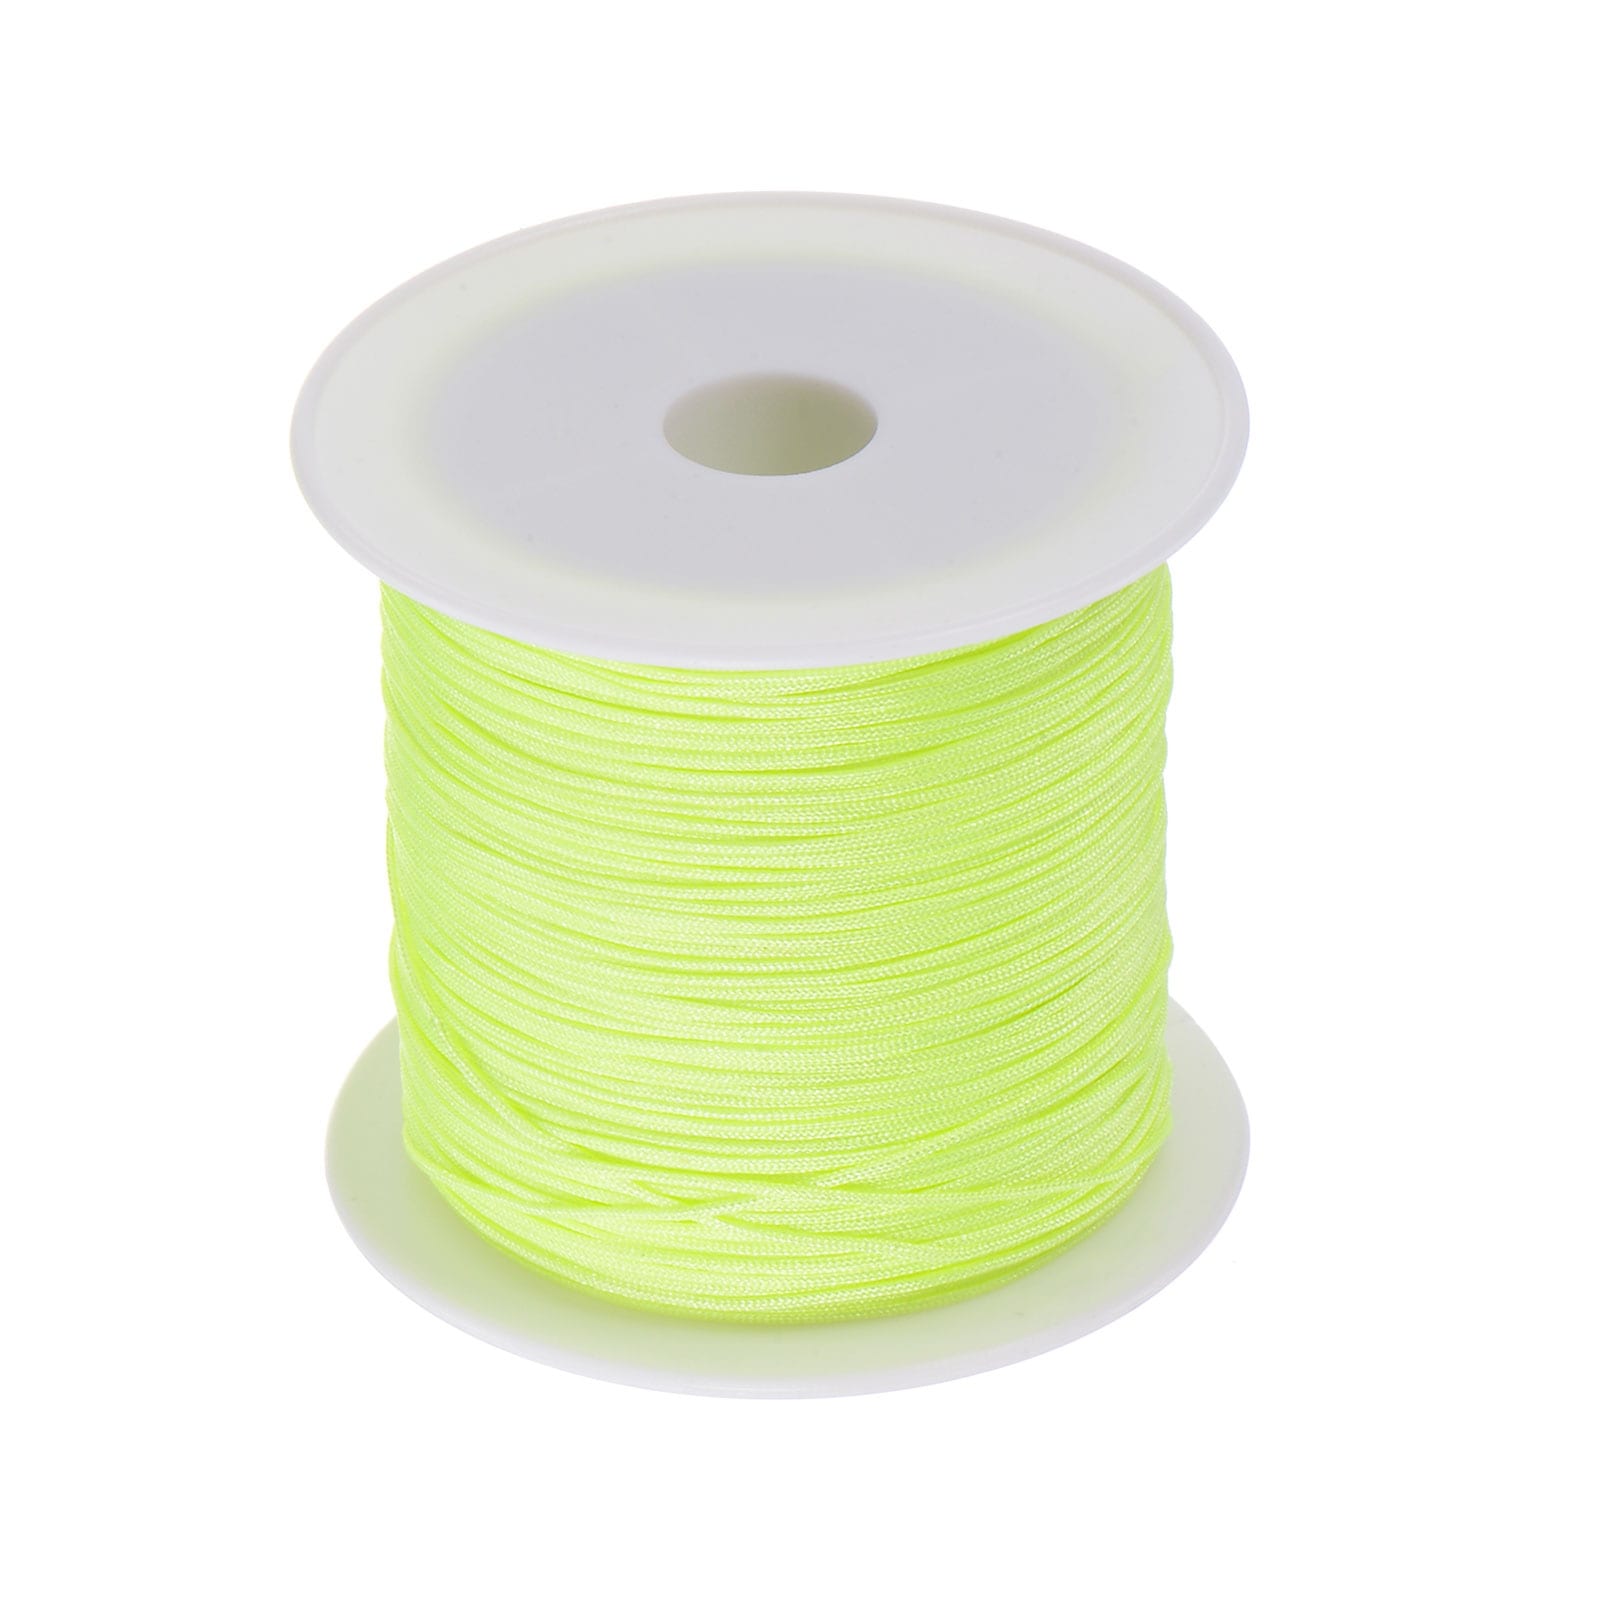 https://ak1.ostkcdn.com/images/products/is/images/direct/aa42f937afeb1a0b018a0e71f0d993e29c4b2783/Nylon-Beading-Thread-Knotting-Cord-0.6mm-50yard-Satin-String%2C-Fluorescent-Yellow.jpg